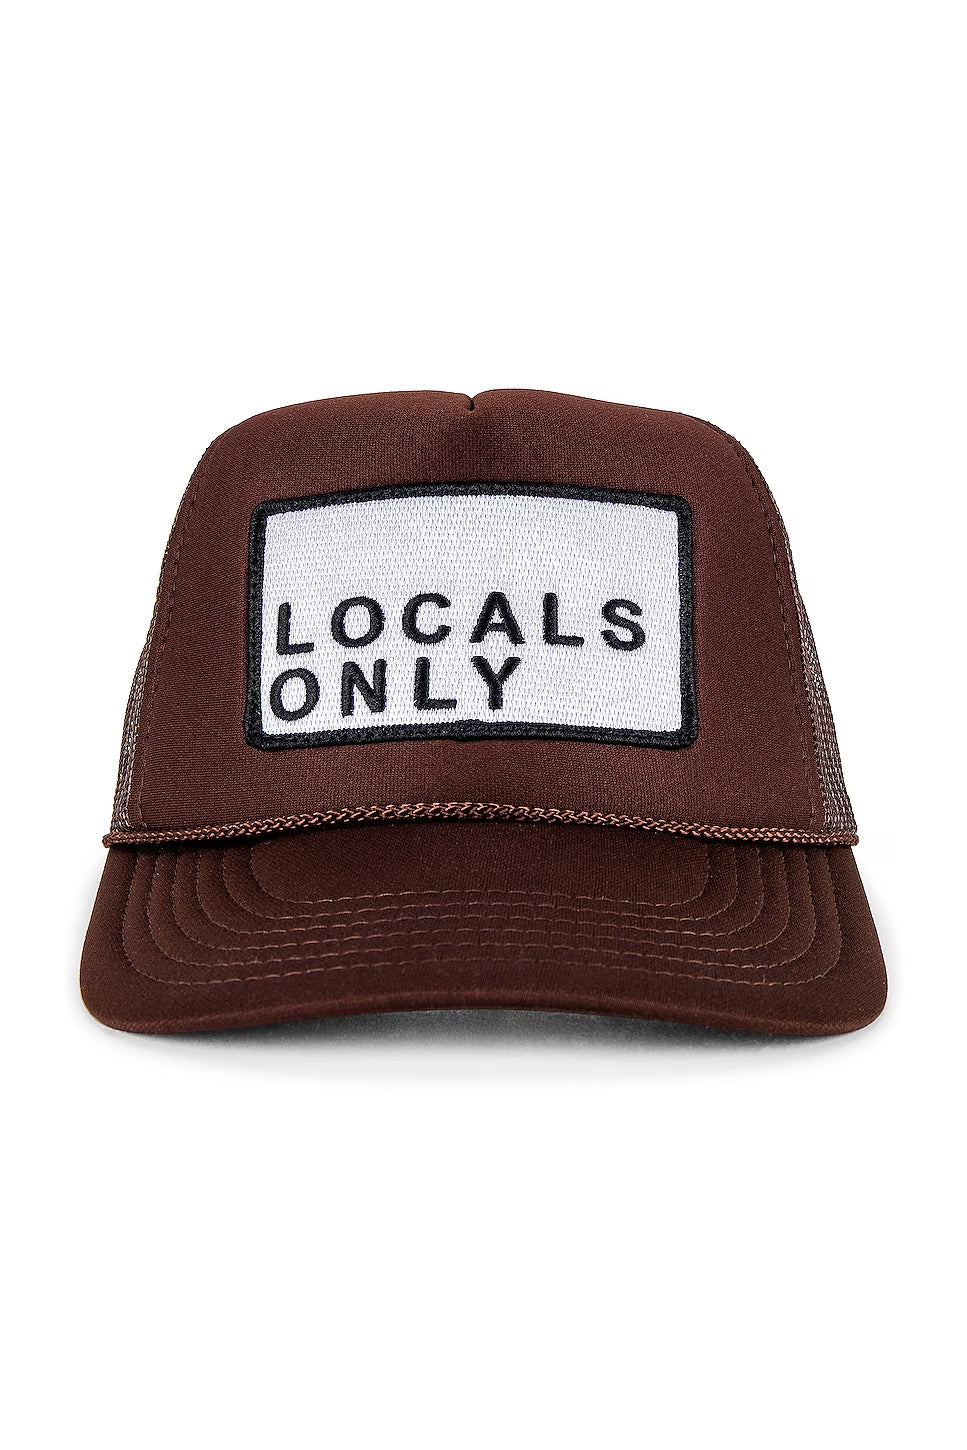 Locals Only Hat - Brown